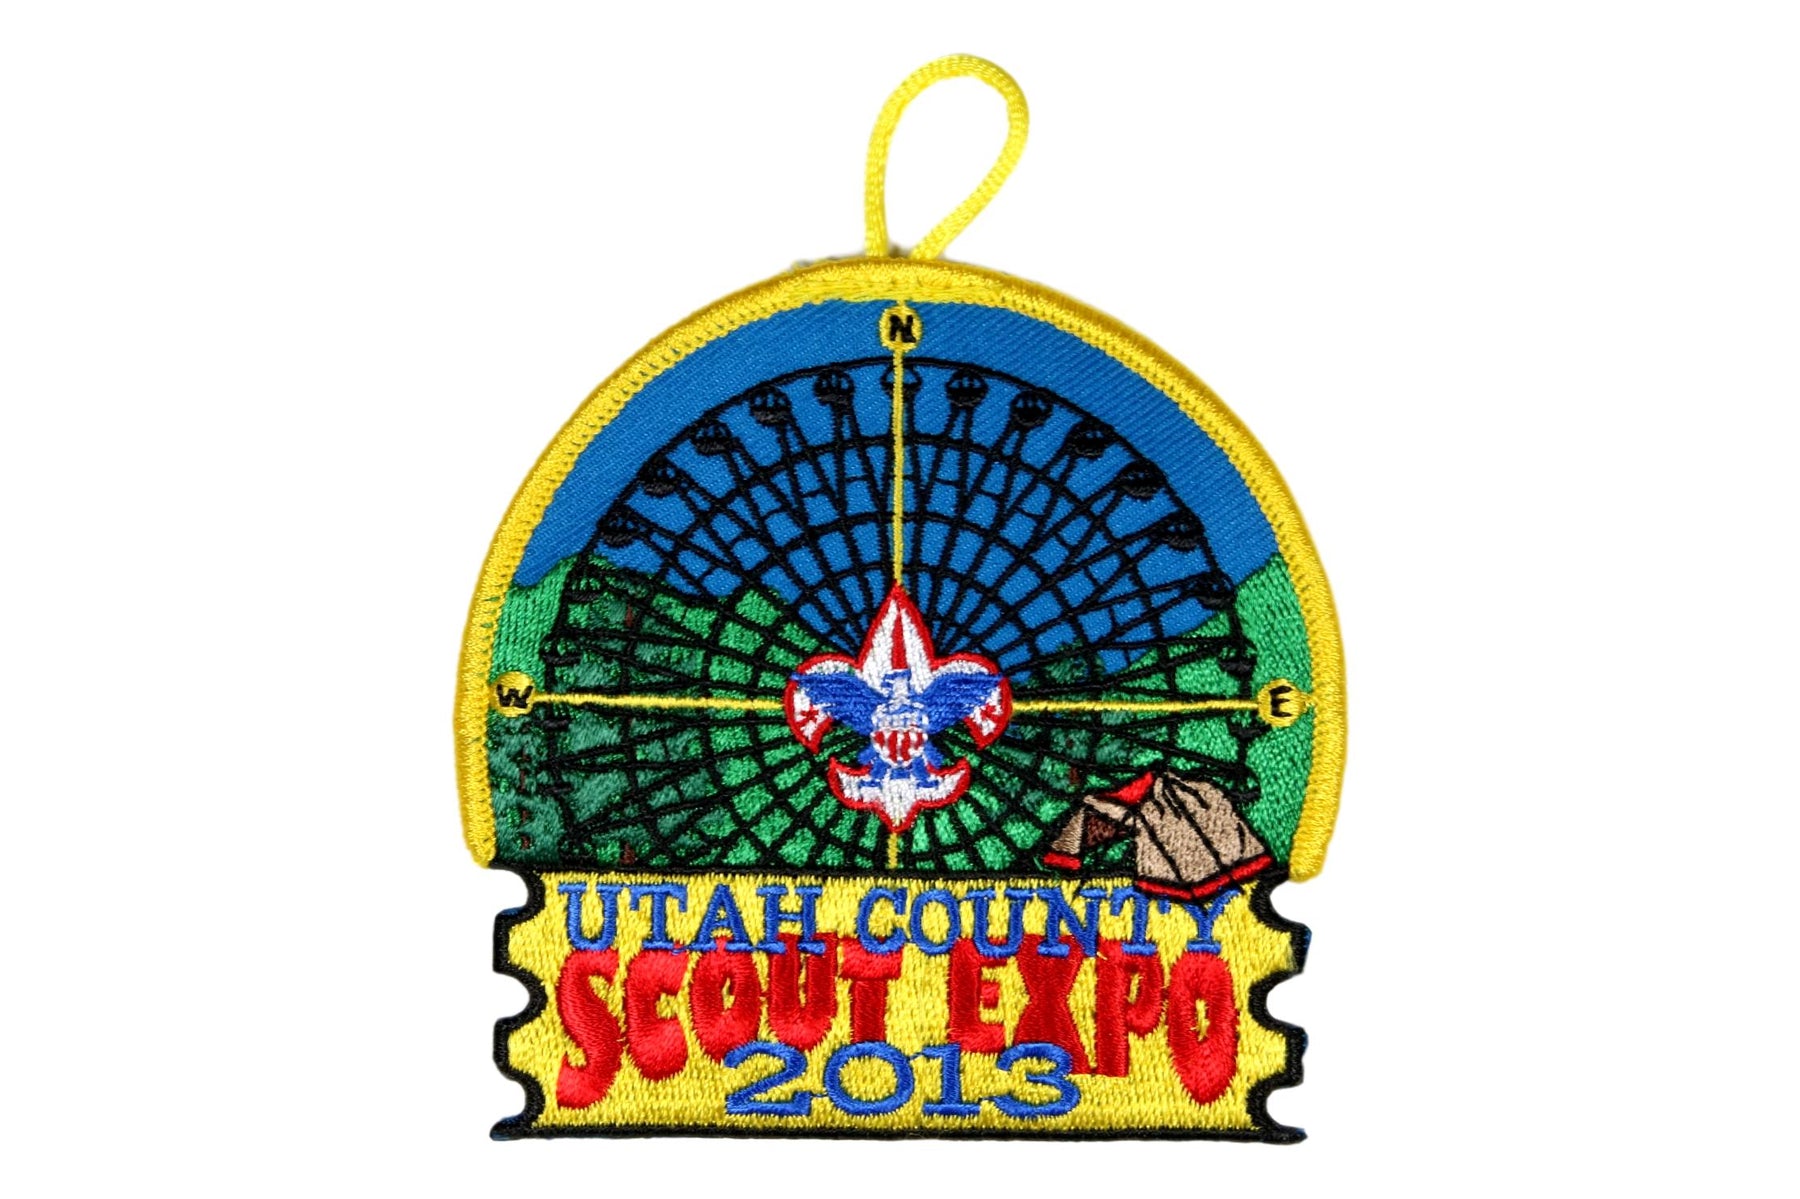 2013 Utah County Scout Expo Patch